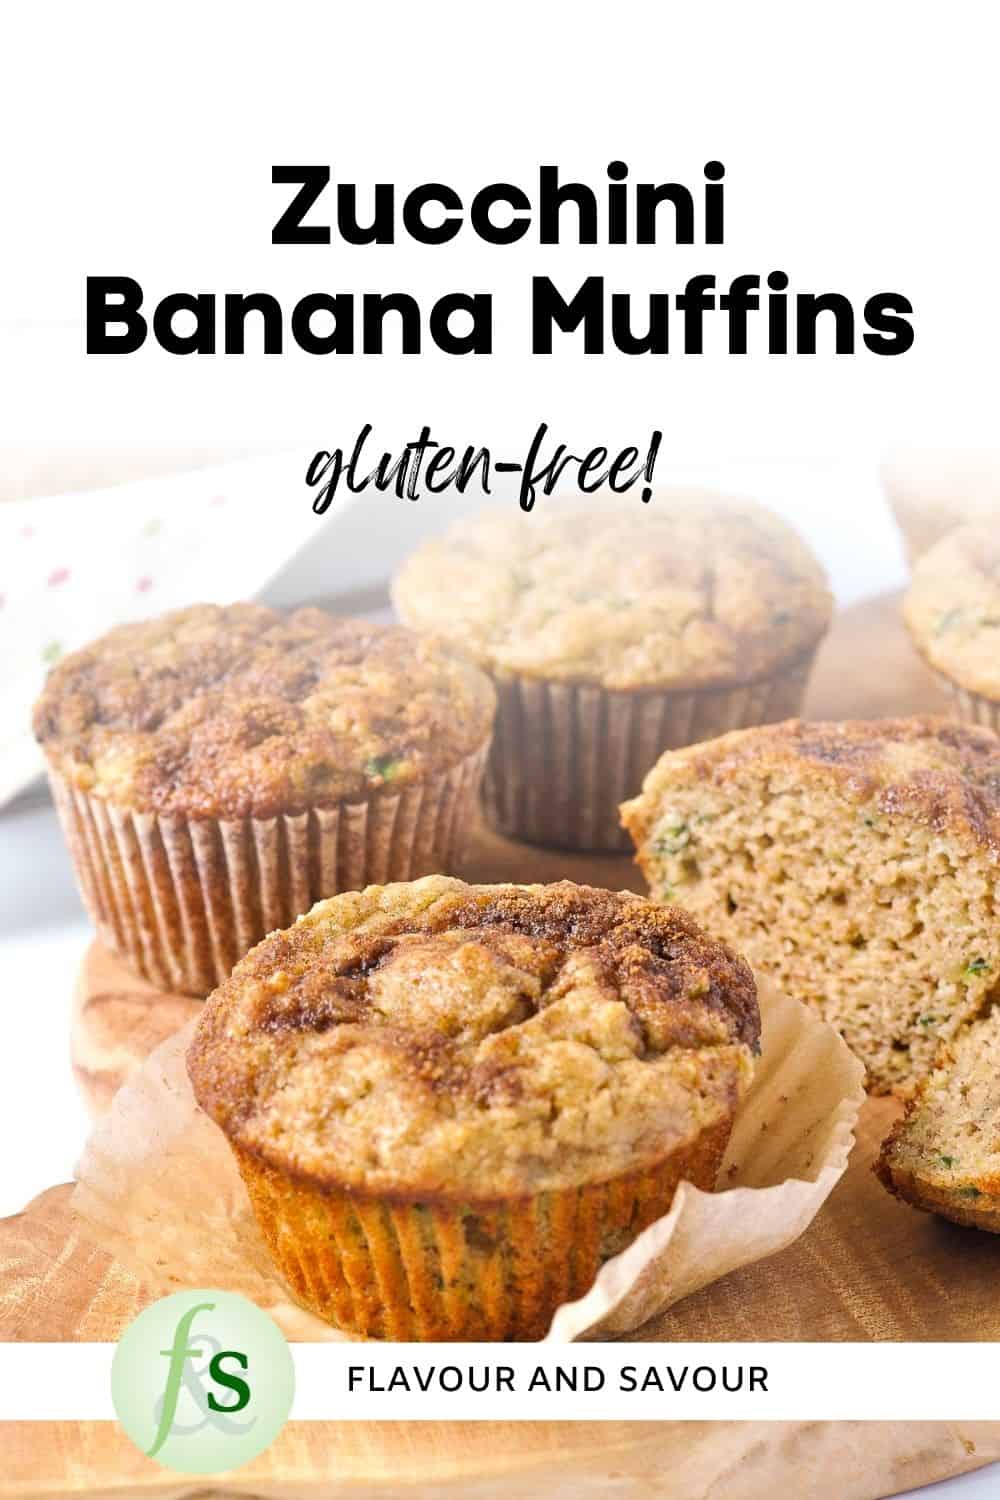 Image with text overlay for Gluten-free Zucchini Banana Muffins.